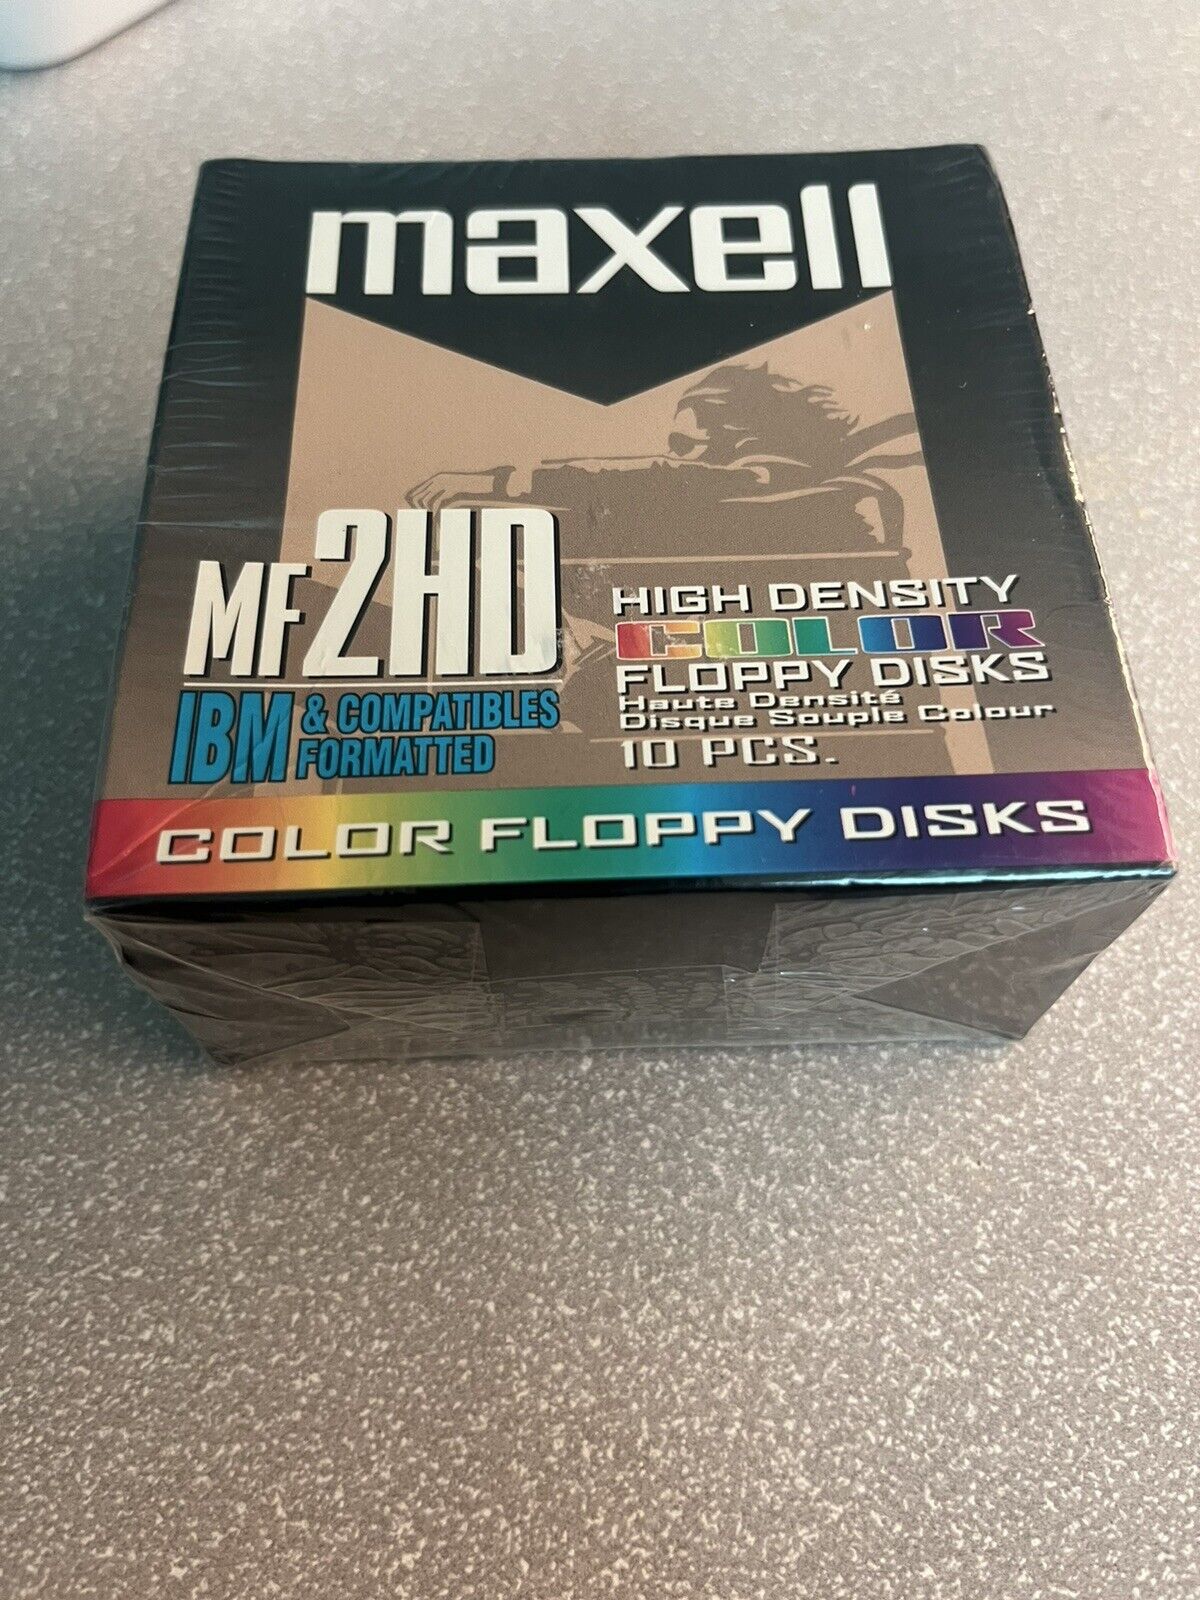 NEW/SEALED 10-PACK - MAXELL MF2HD - COLOR FLOPPY DISKS - VINTAGE SOFTWARE